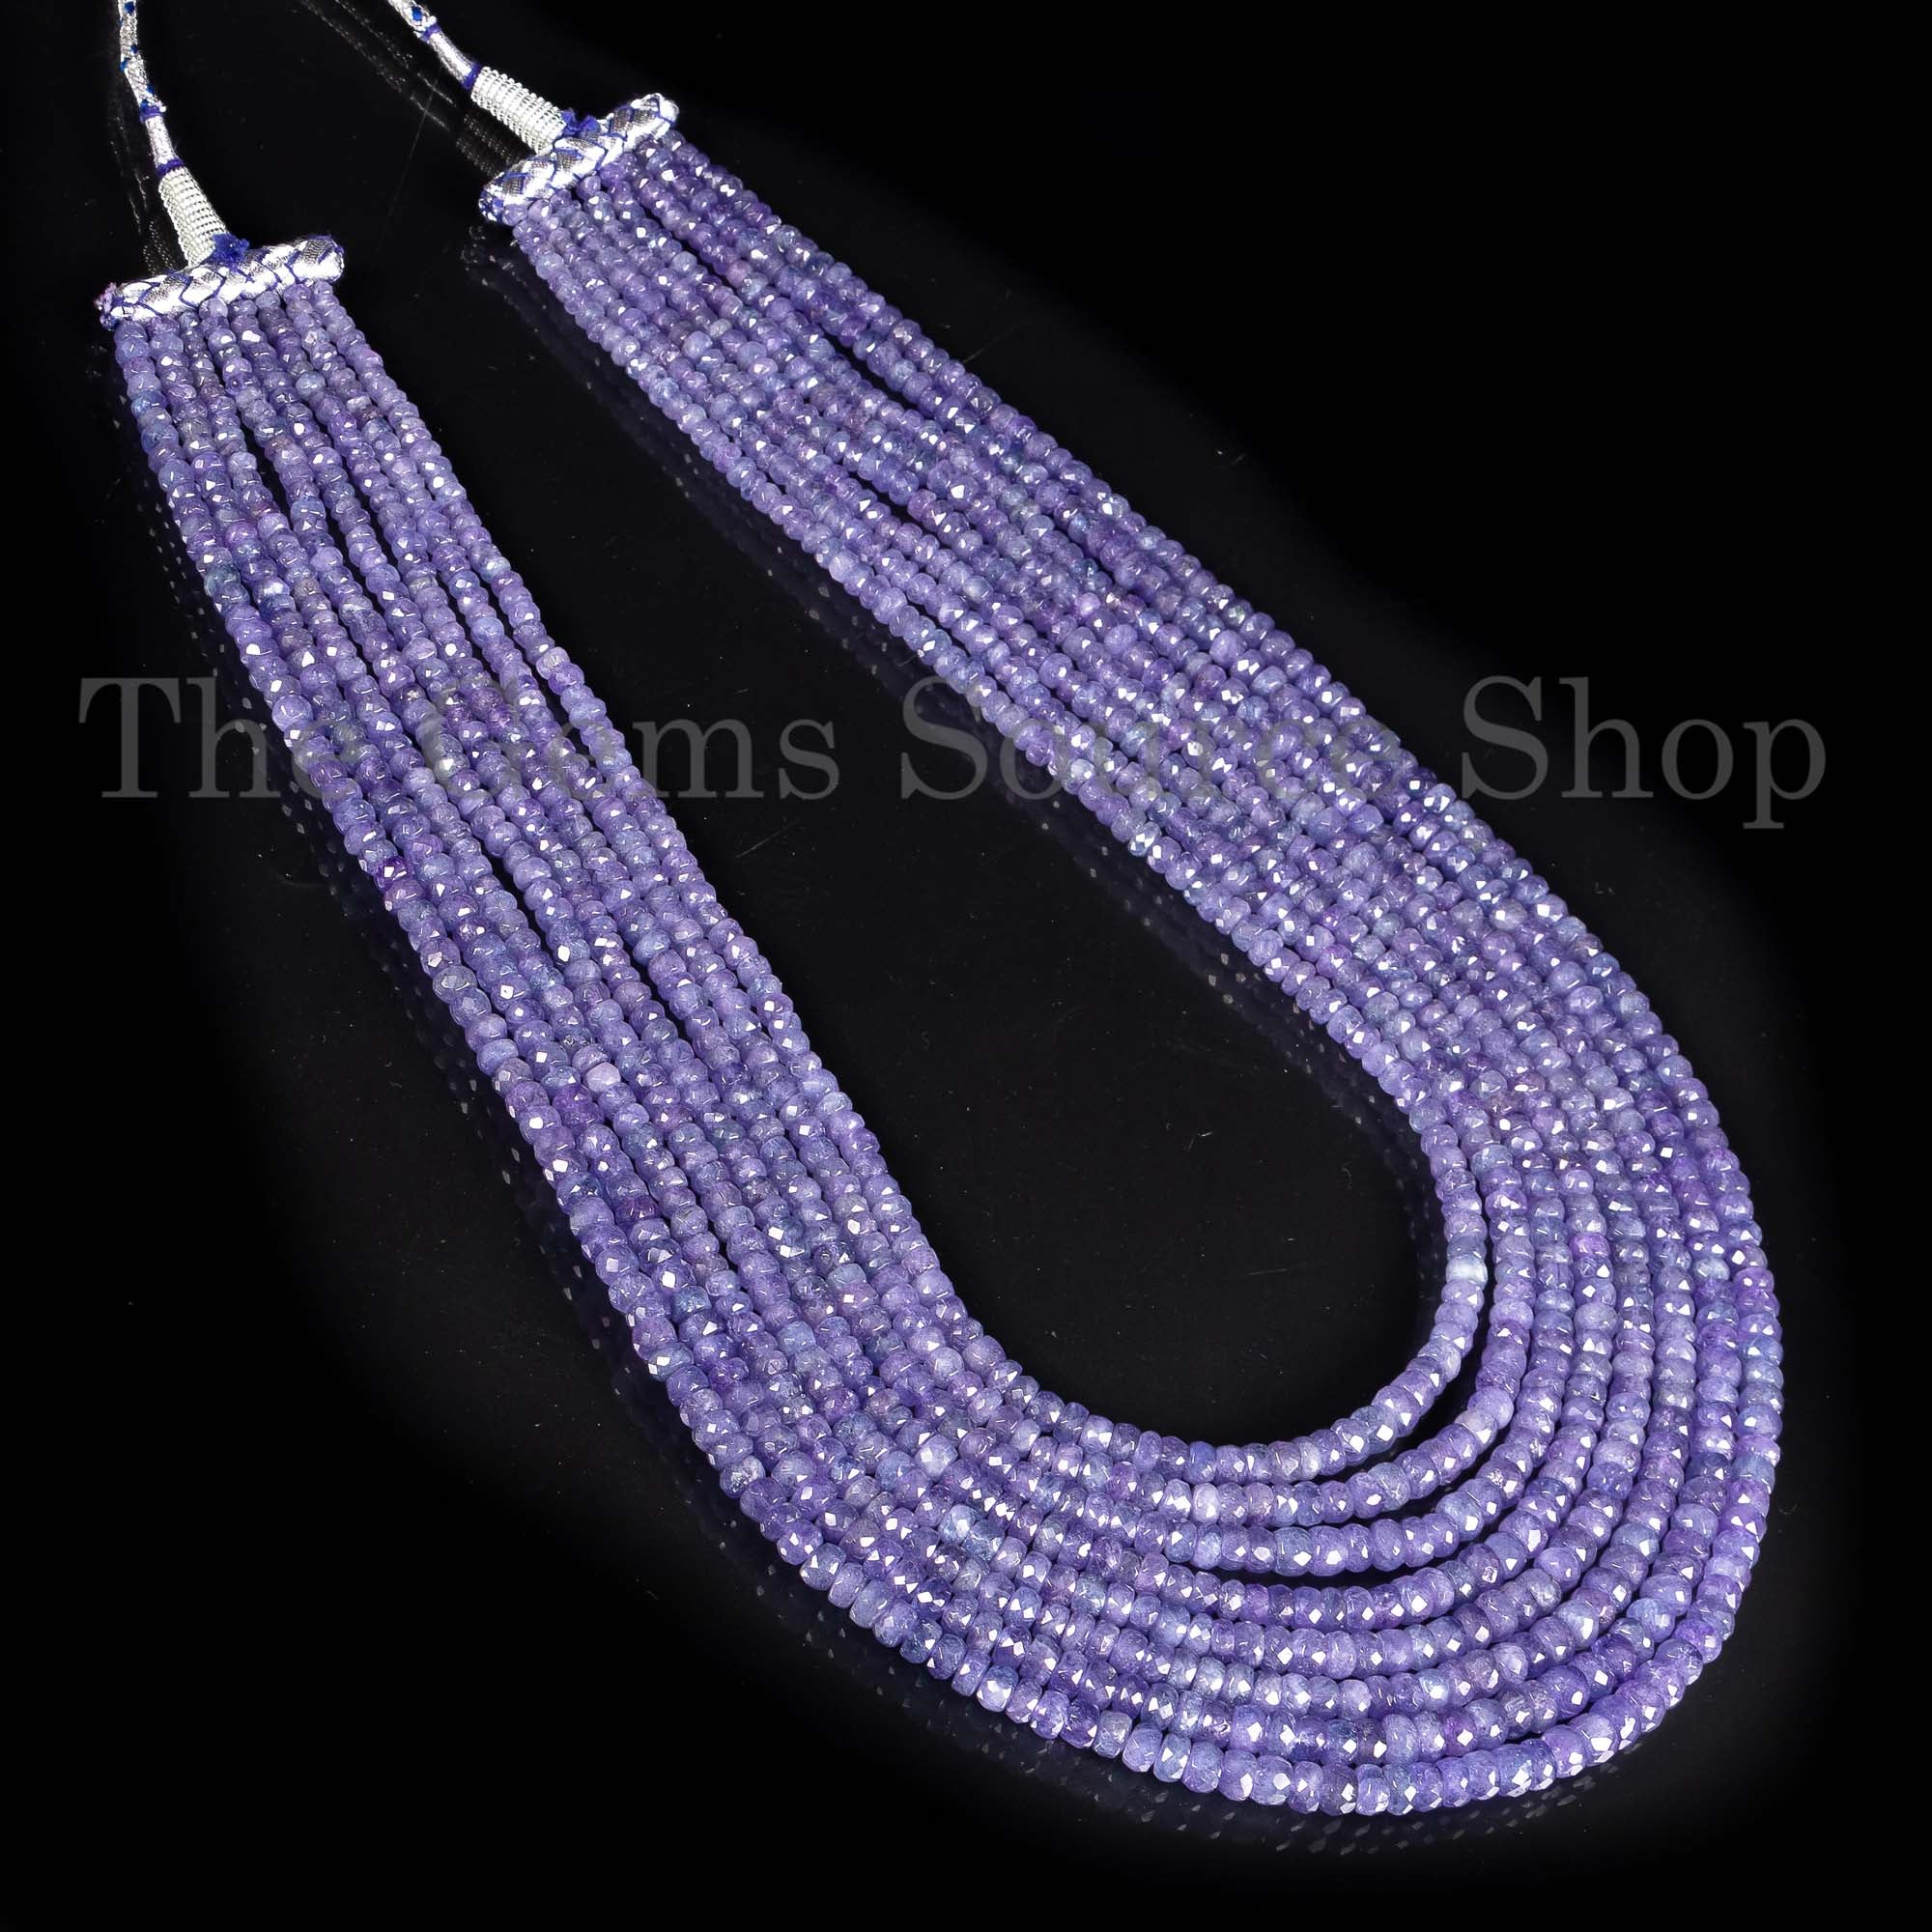 Tanzanite Beads Necklace, Tanzanite Faceted Necklace, Tanzanite Rondelle Beads Necklace